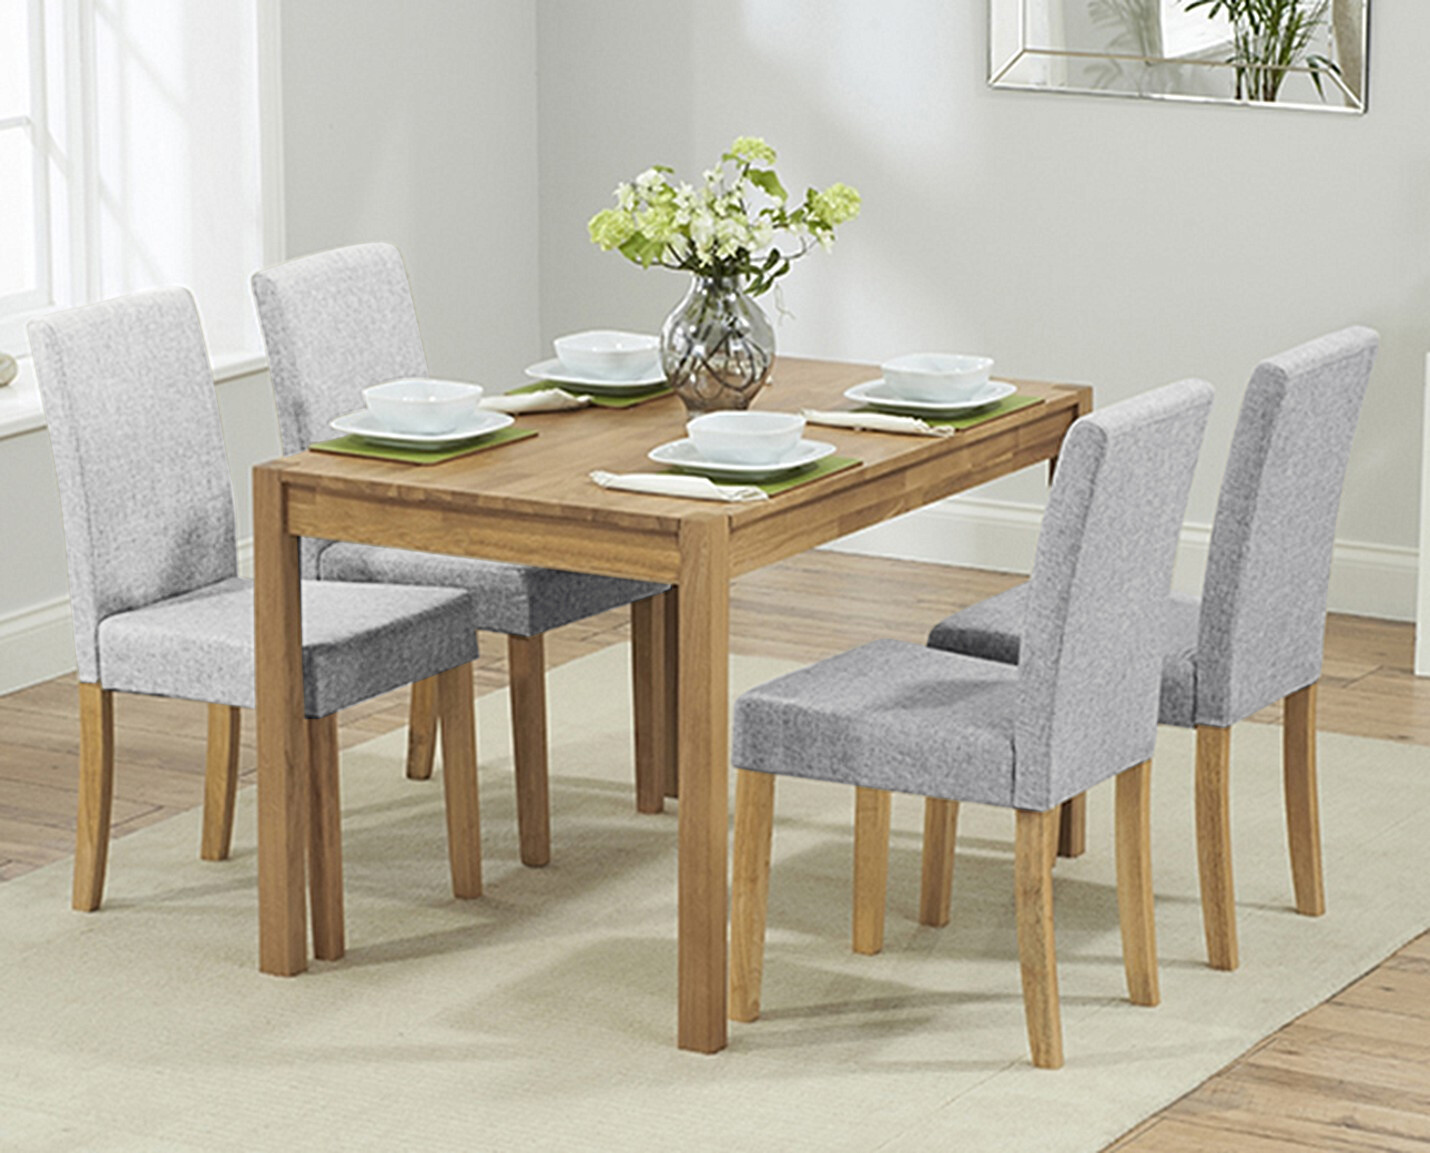 York 120cm Solid Oak Dining Table With 4 Grey Lila Fabric Chairs